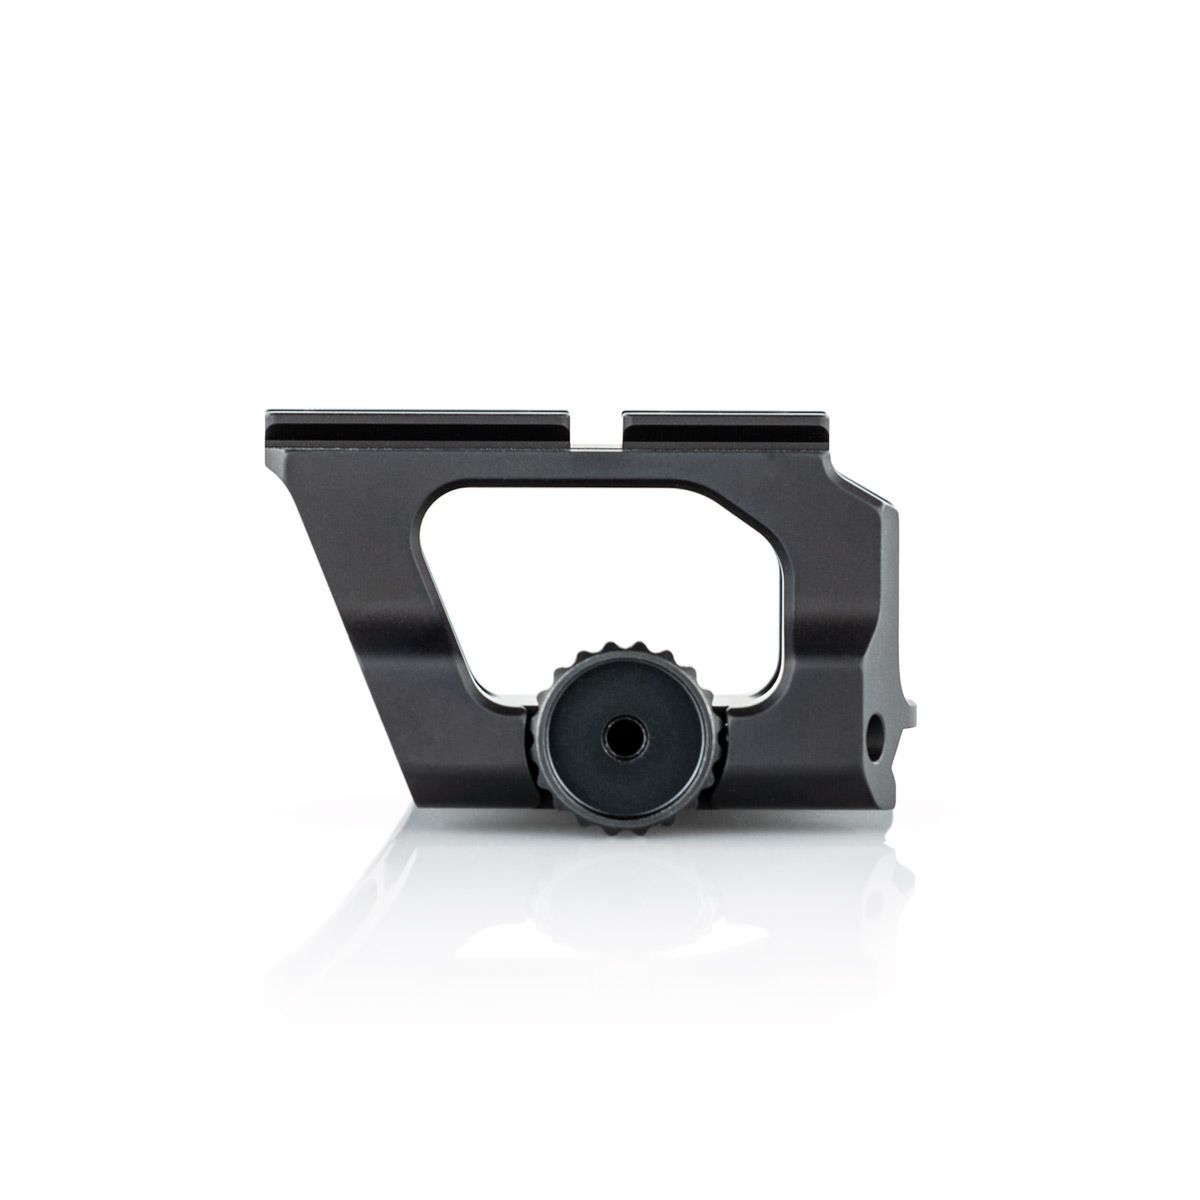 Scalarworks LEAP/03 Aimpoint ACRO Mount | Up to $7.99 Off 5 Star 